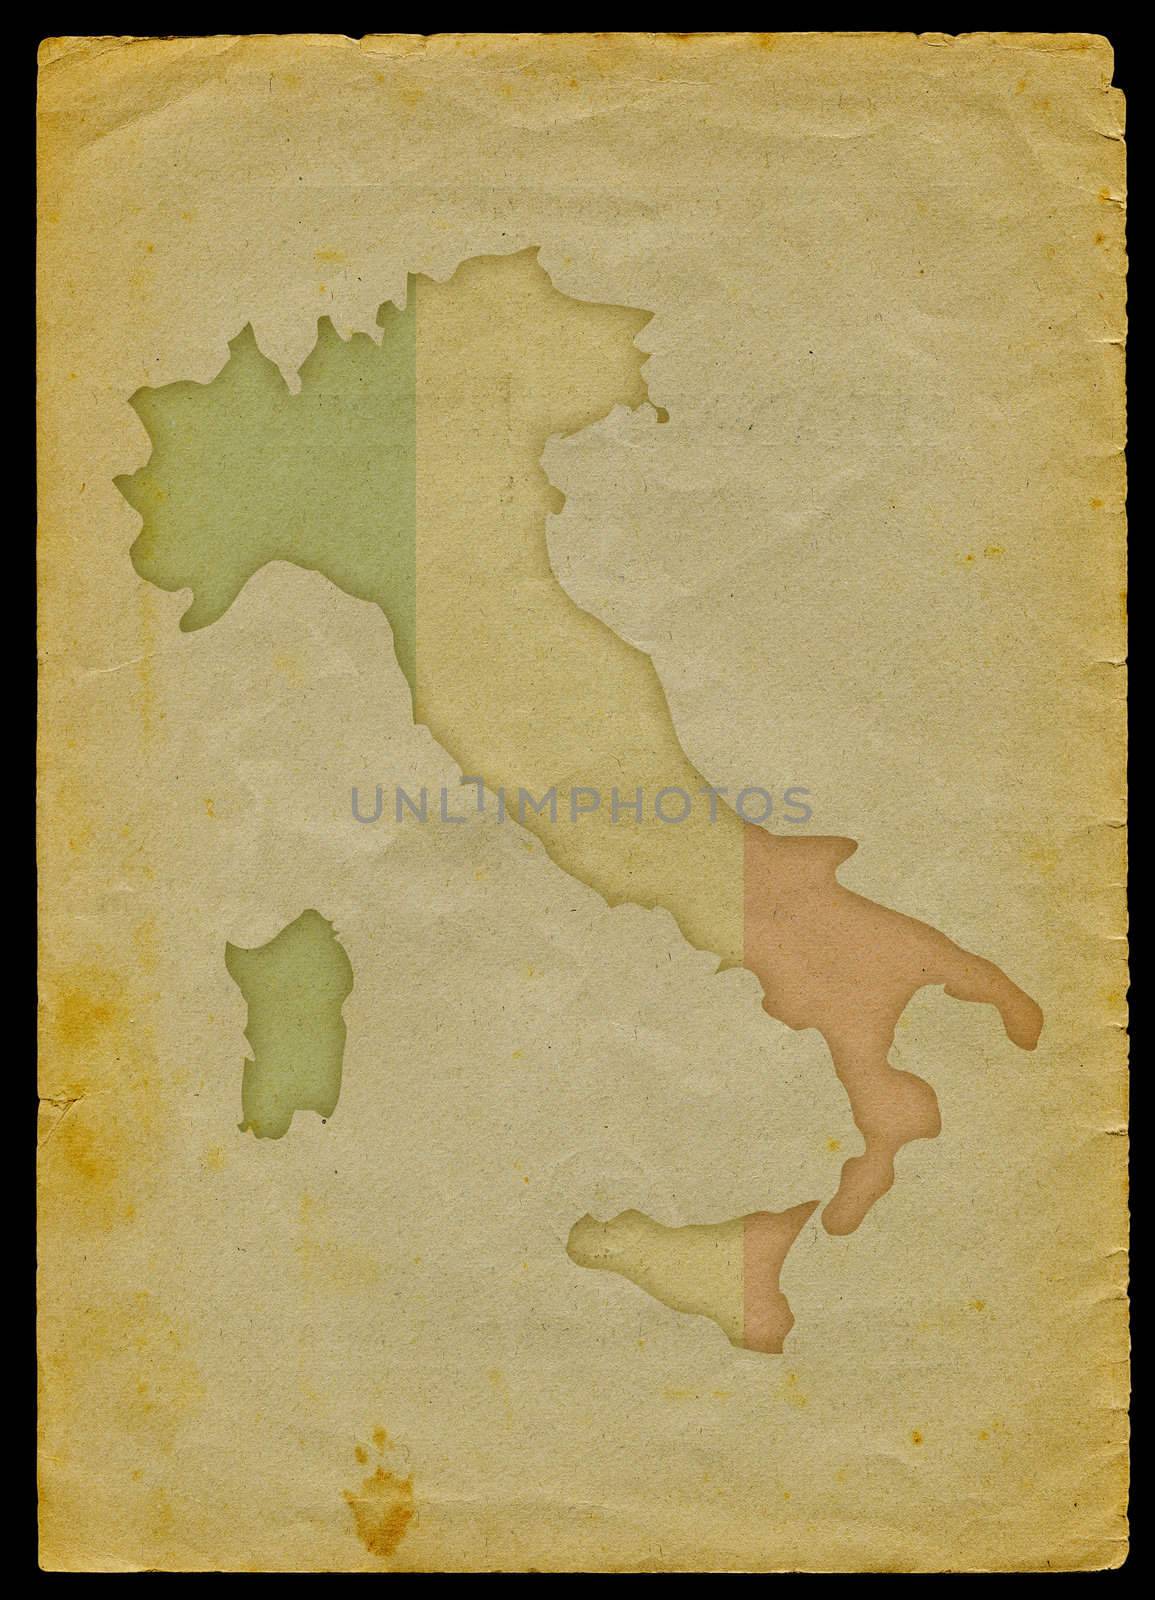 Italy map on old paper by bonathos